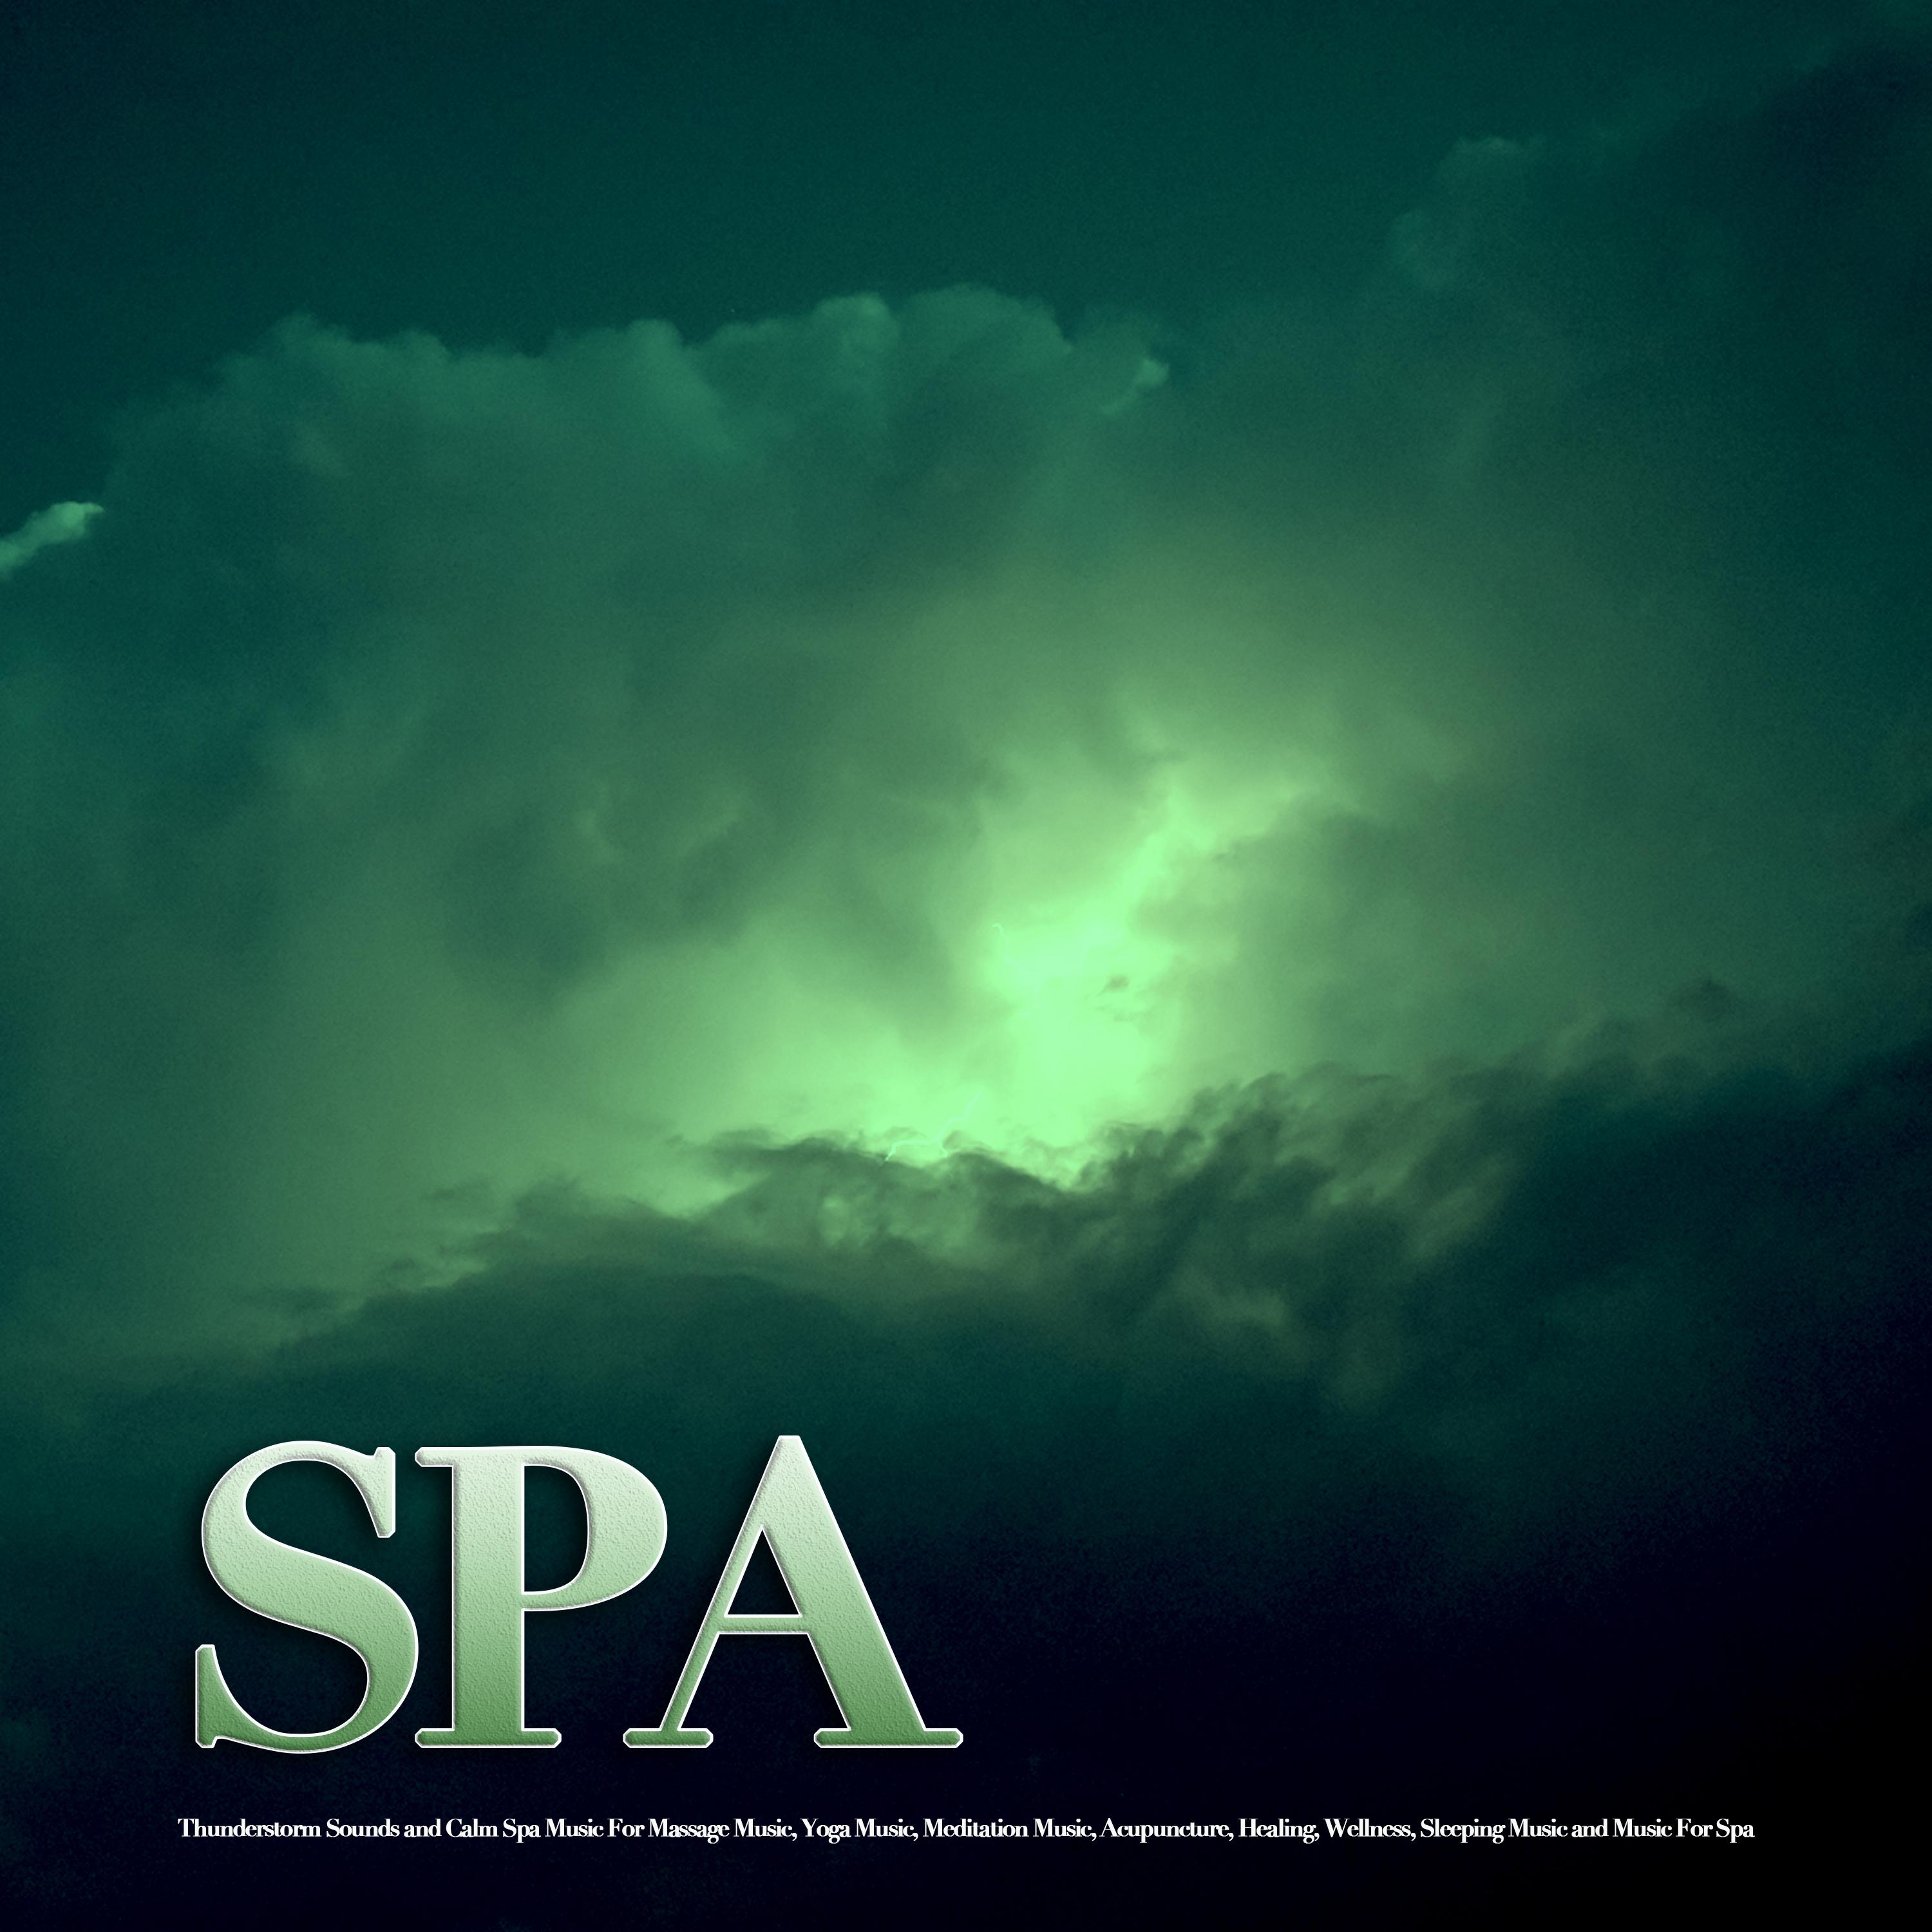 Spa: Calm Spa Music For Massage Music, Yoga Music, Meditation Music, Acupuncture, Healing, Wellness, Sleeping Music and Music For Spa